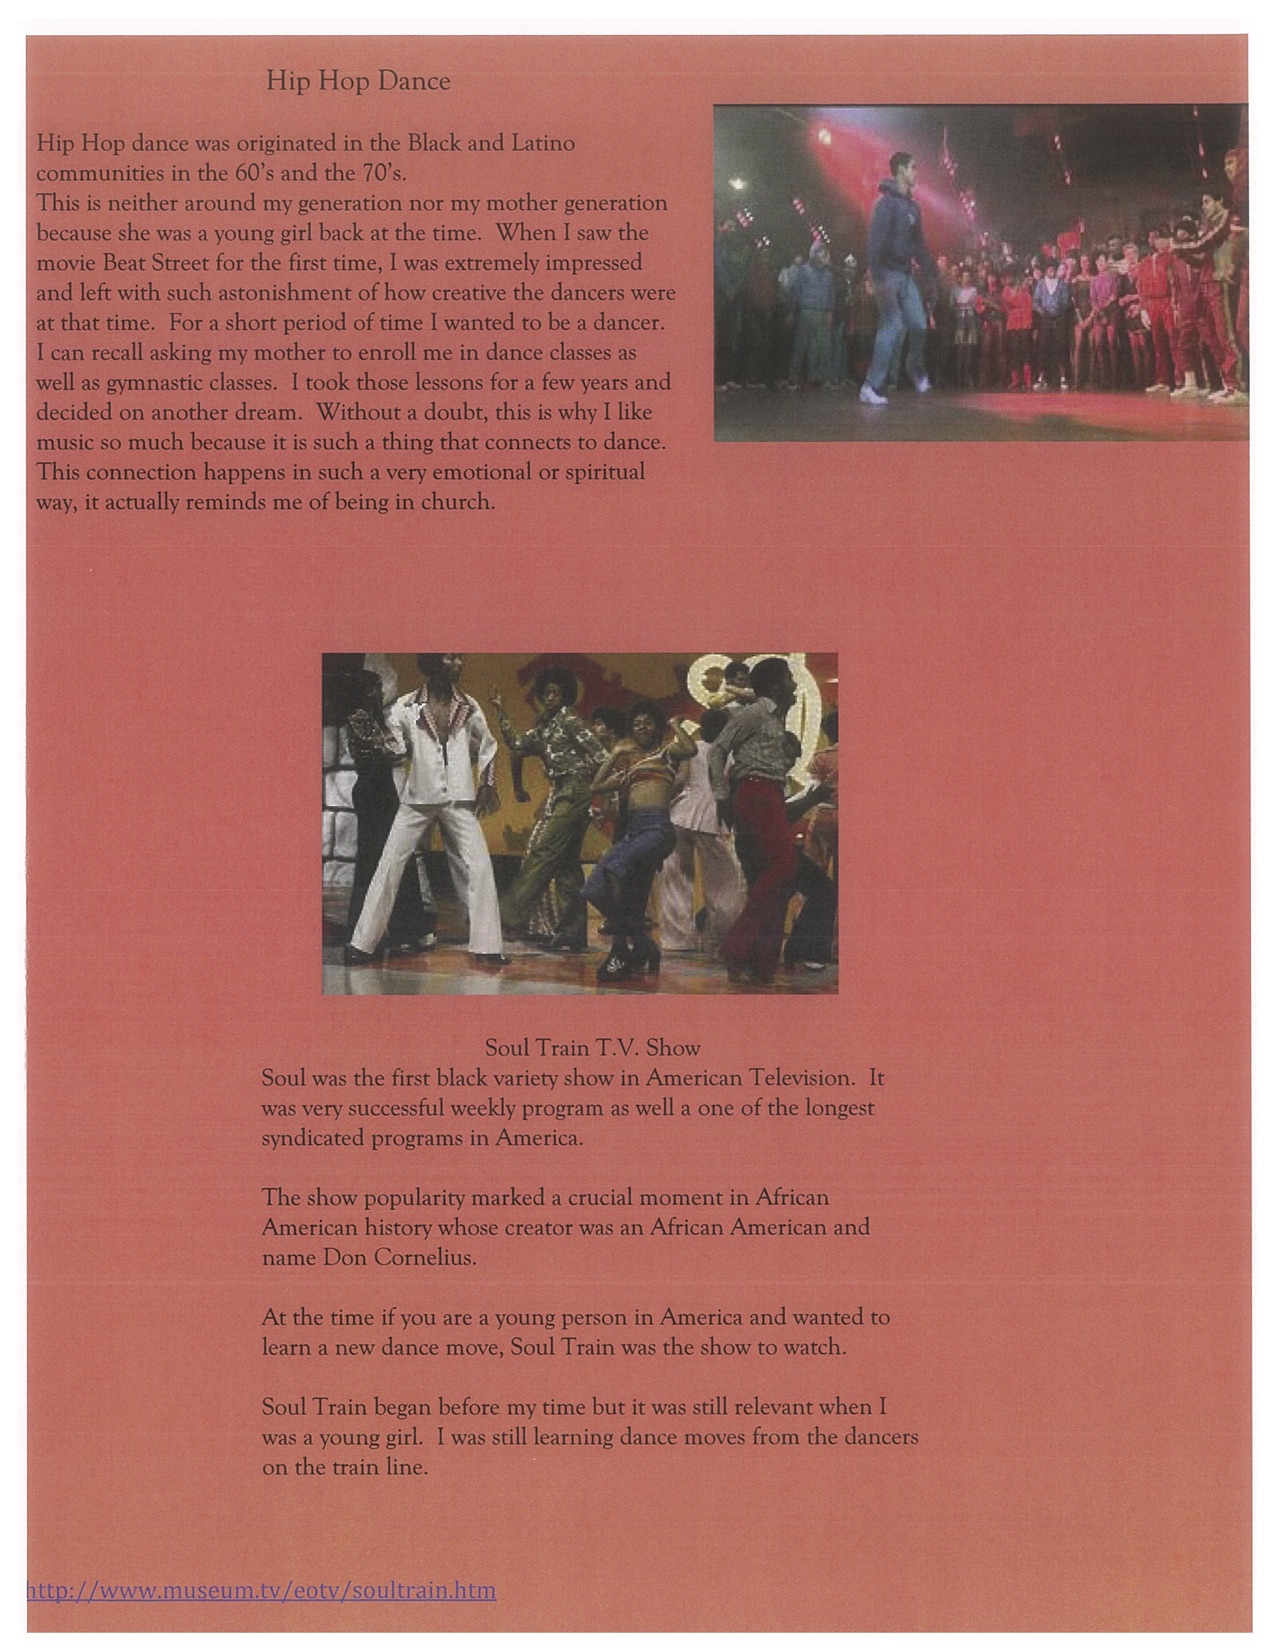 Page 2. shows some details of Hip Hop Dance on some T.V Shows.